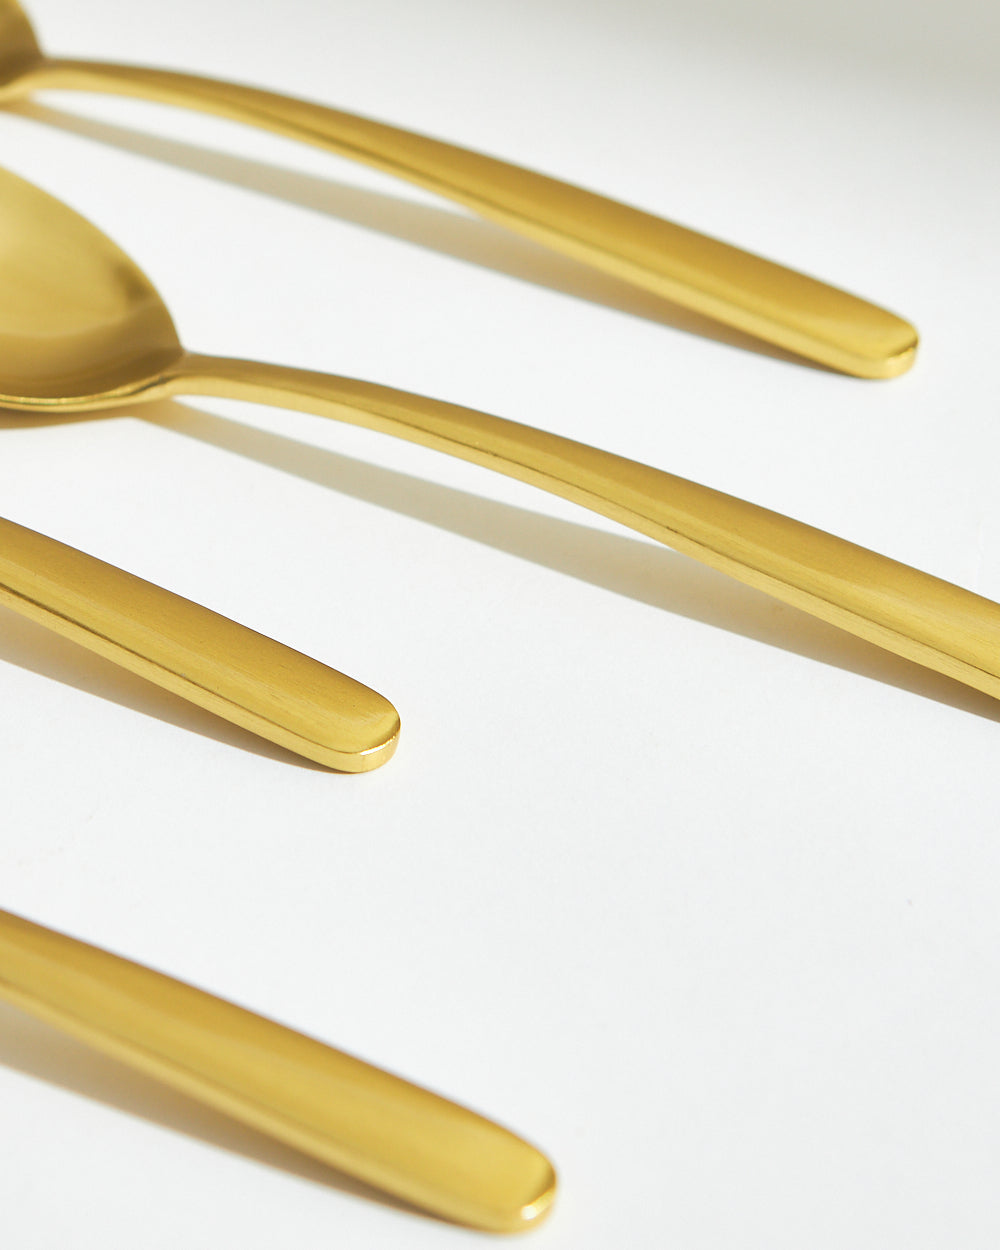 Classic Gold Meal Spoons - Set of 4